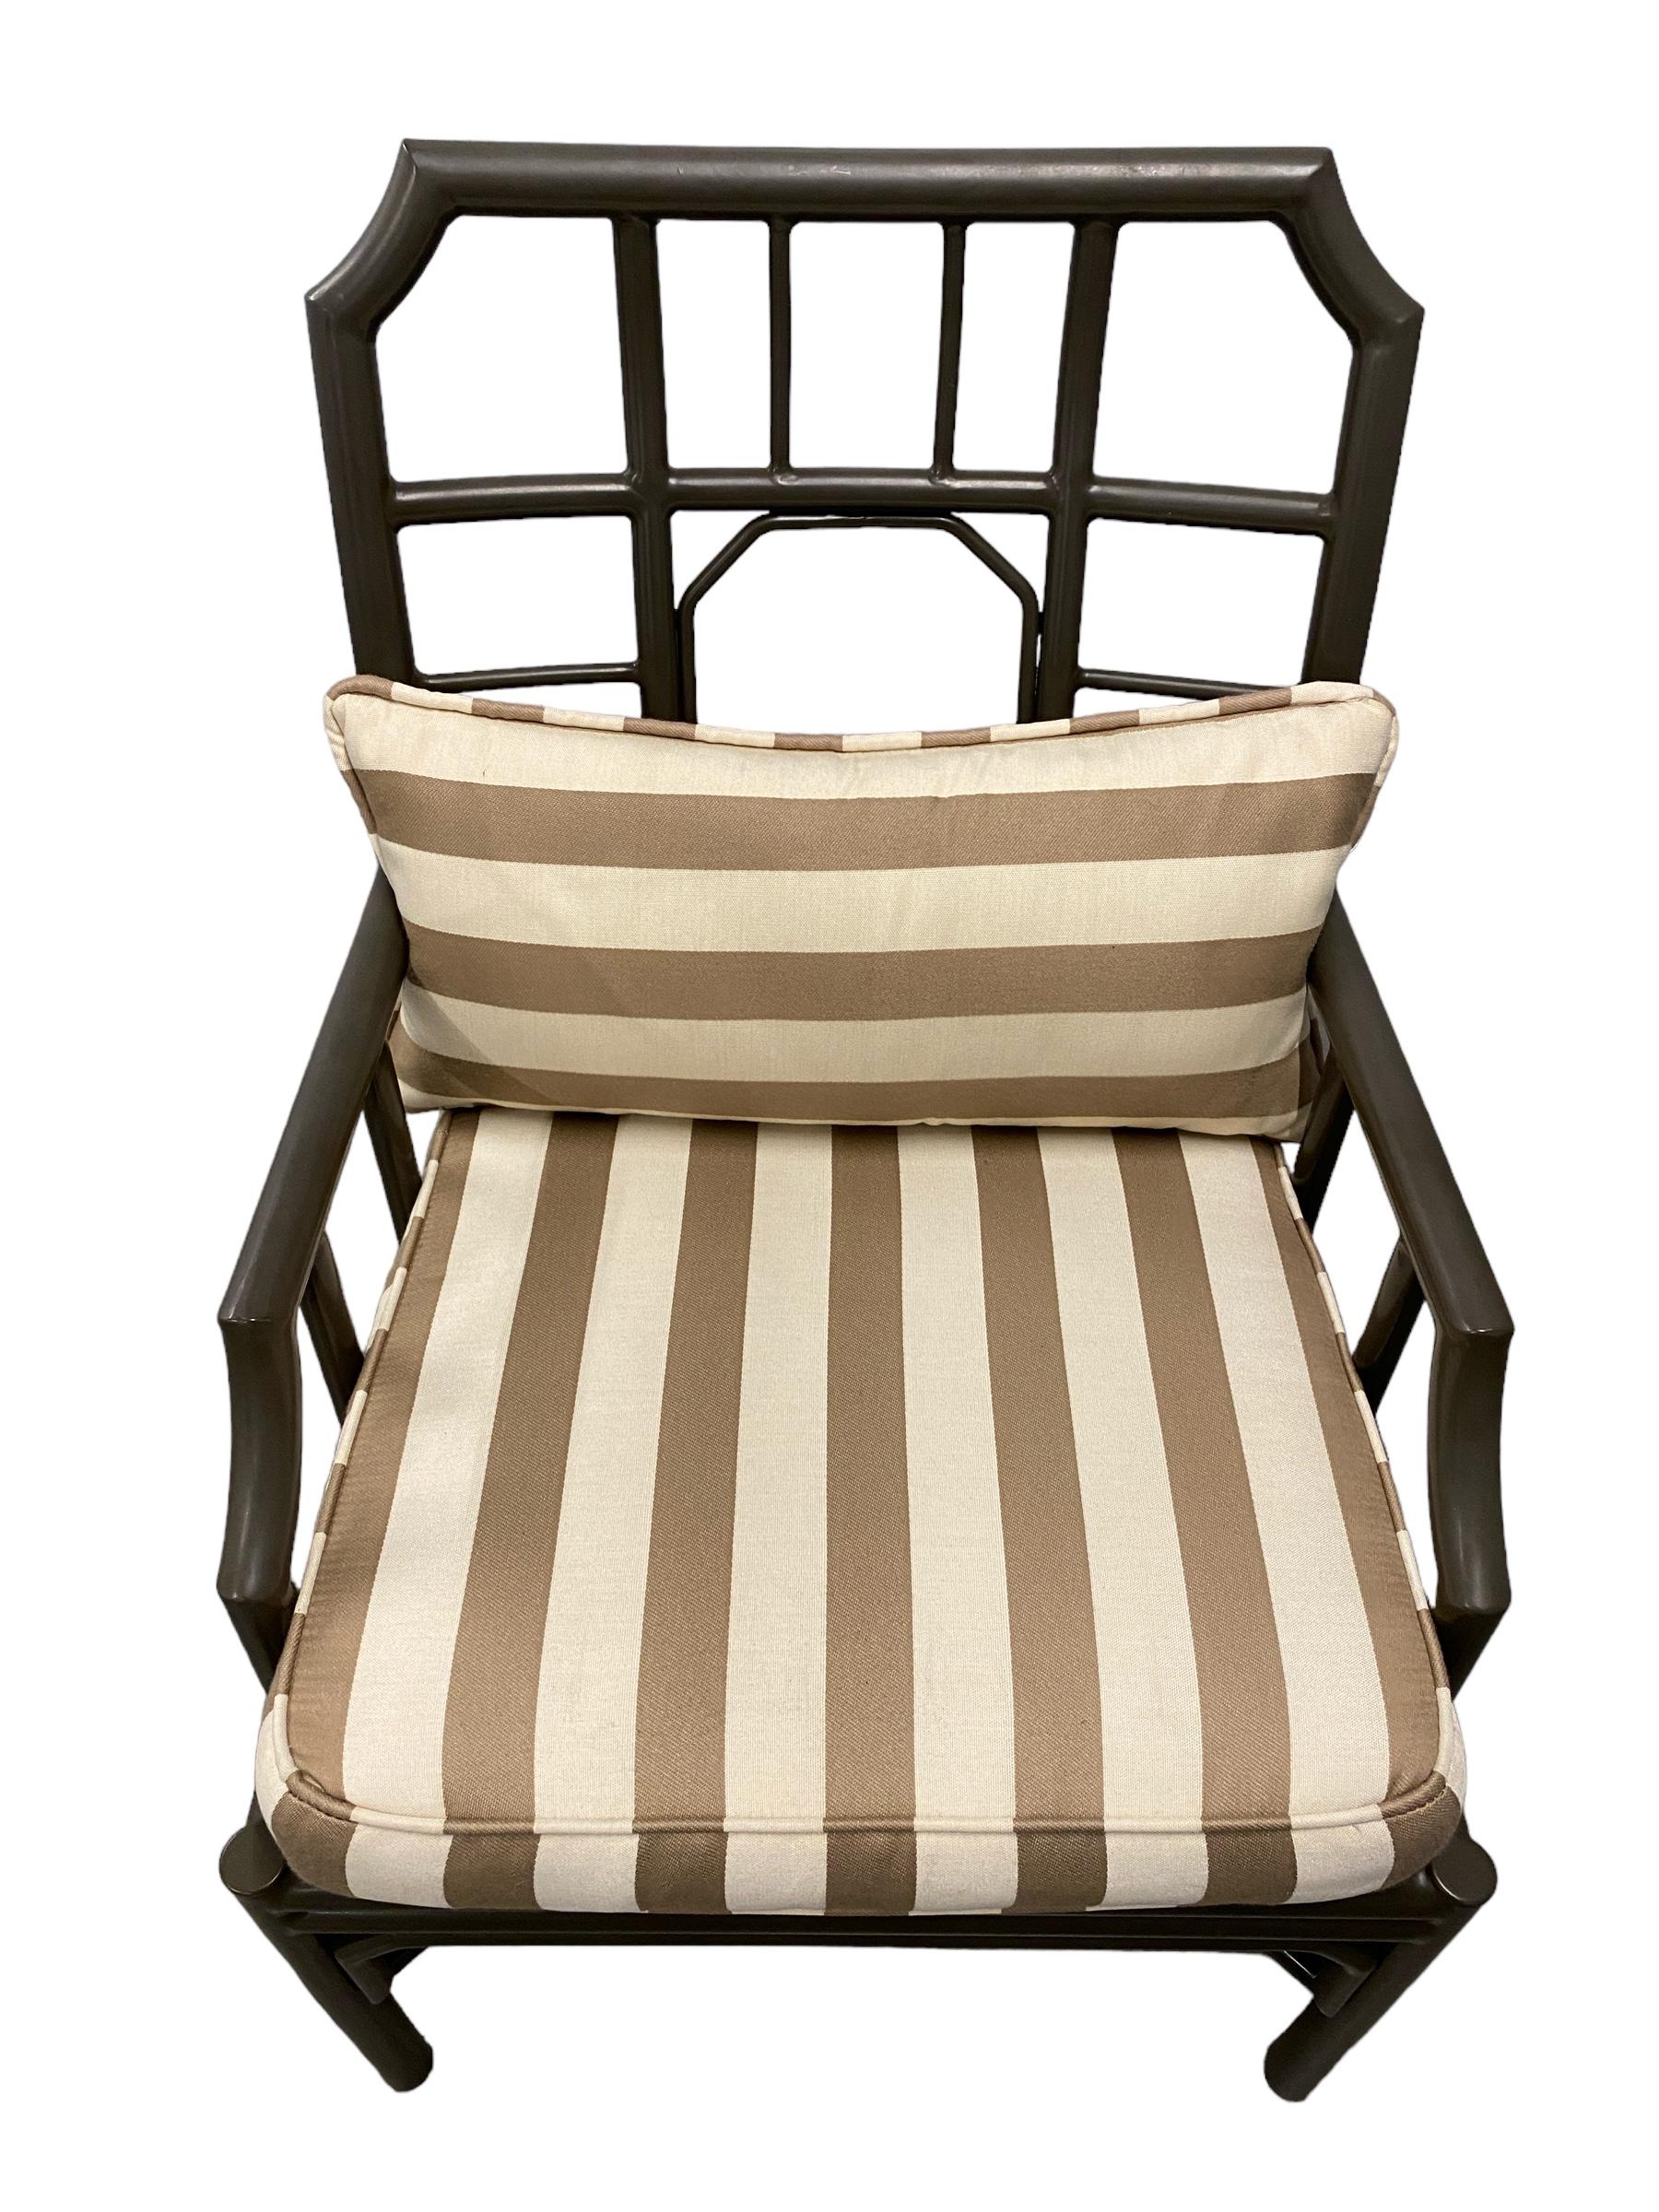 Pair of Metal Outdoor Armchairs with Striped Fabric In Good Condition For Sale In Scottsdale, AZ